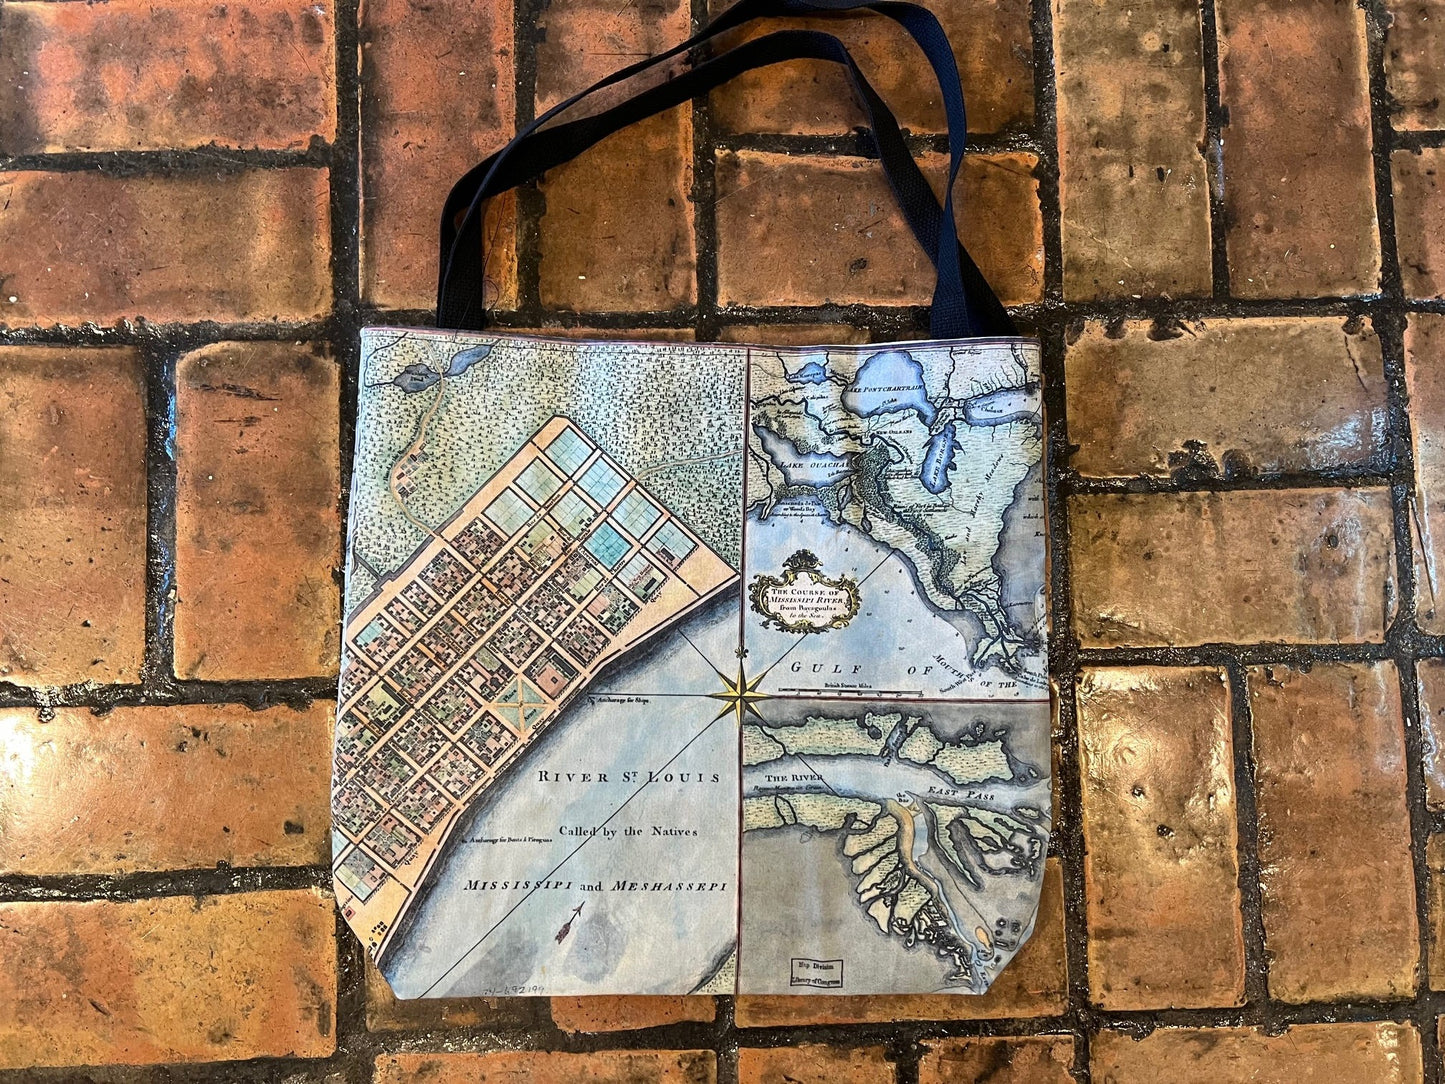 Historic FRENCH QUARTER of New Orleans 1720, hand-painted by Lisa Middleton 2013 tote bag